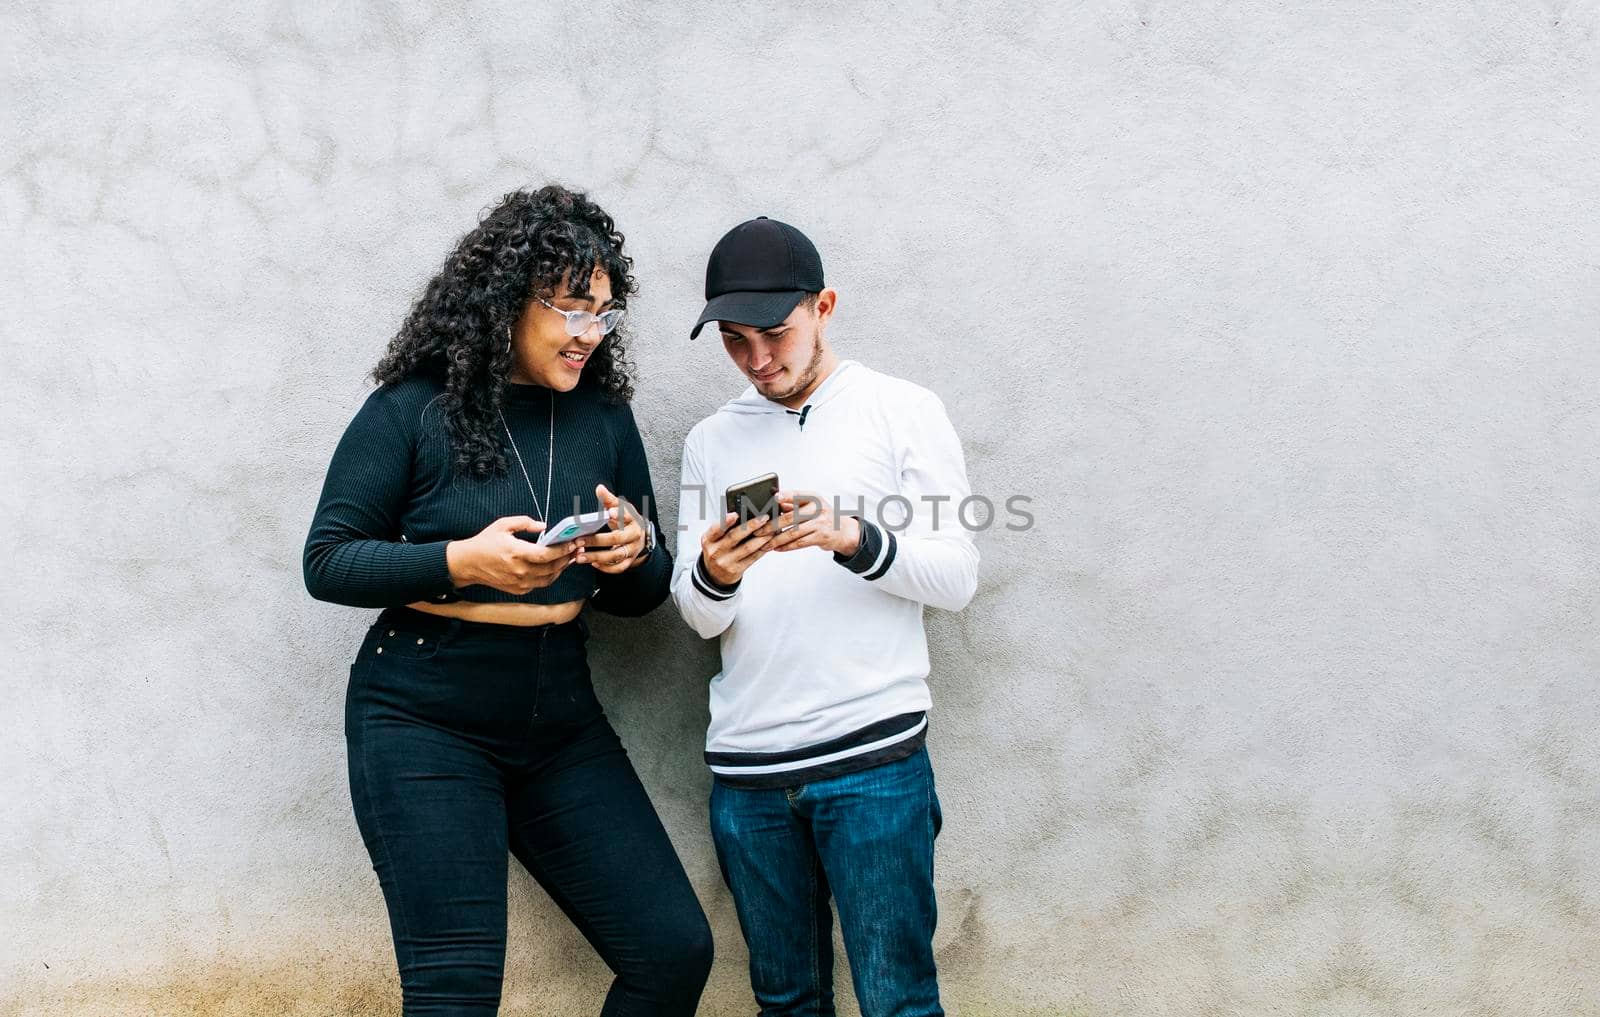 Two teenage friends checking their cell phones and smiling, Two teenagers together checking their cell phones, Guy and girl leaning on a wall checking their cell phones, Two smiling friends checking their cell phones by isaiphoto